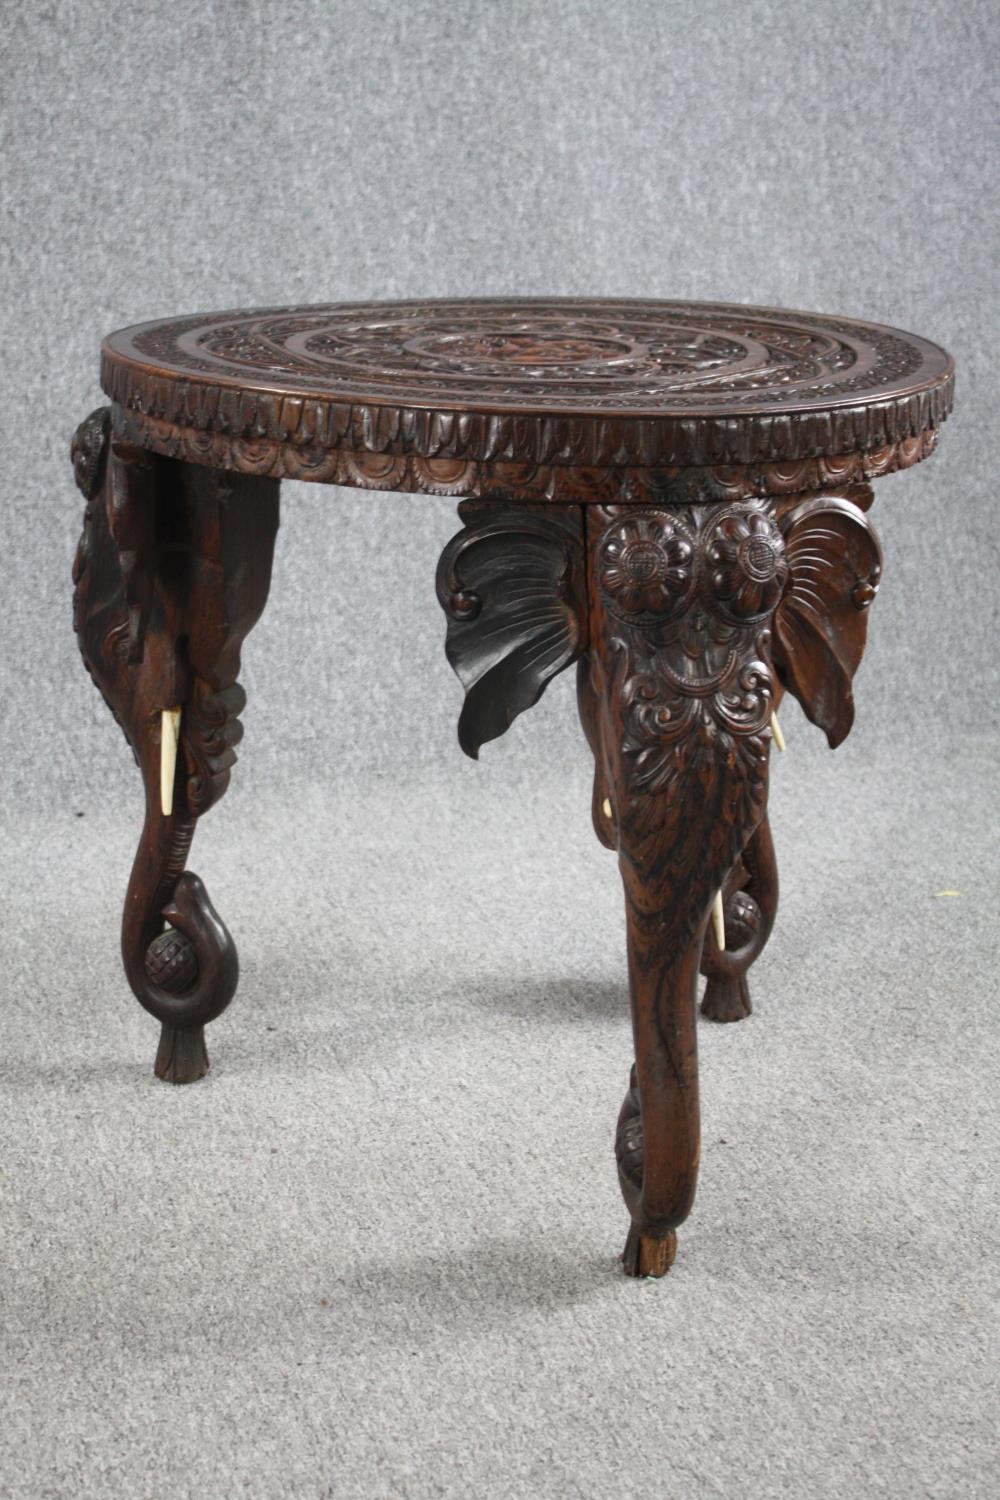 Lamp or occasional table, eastern carved hardwood with elephant supports and bone tusks. H.62 Dia. - Image 3 of 5